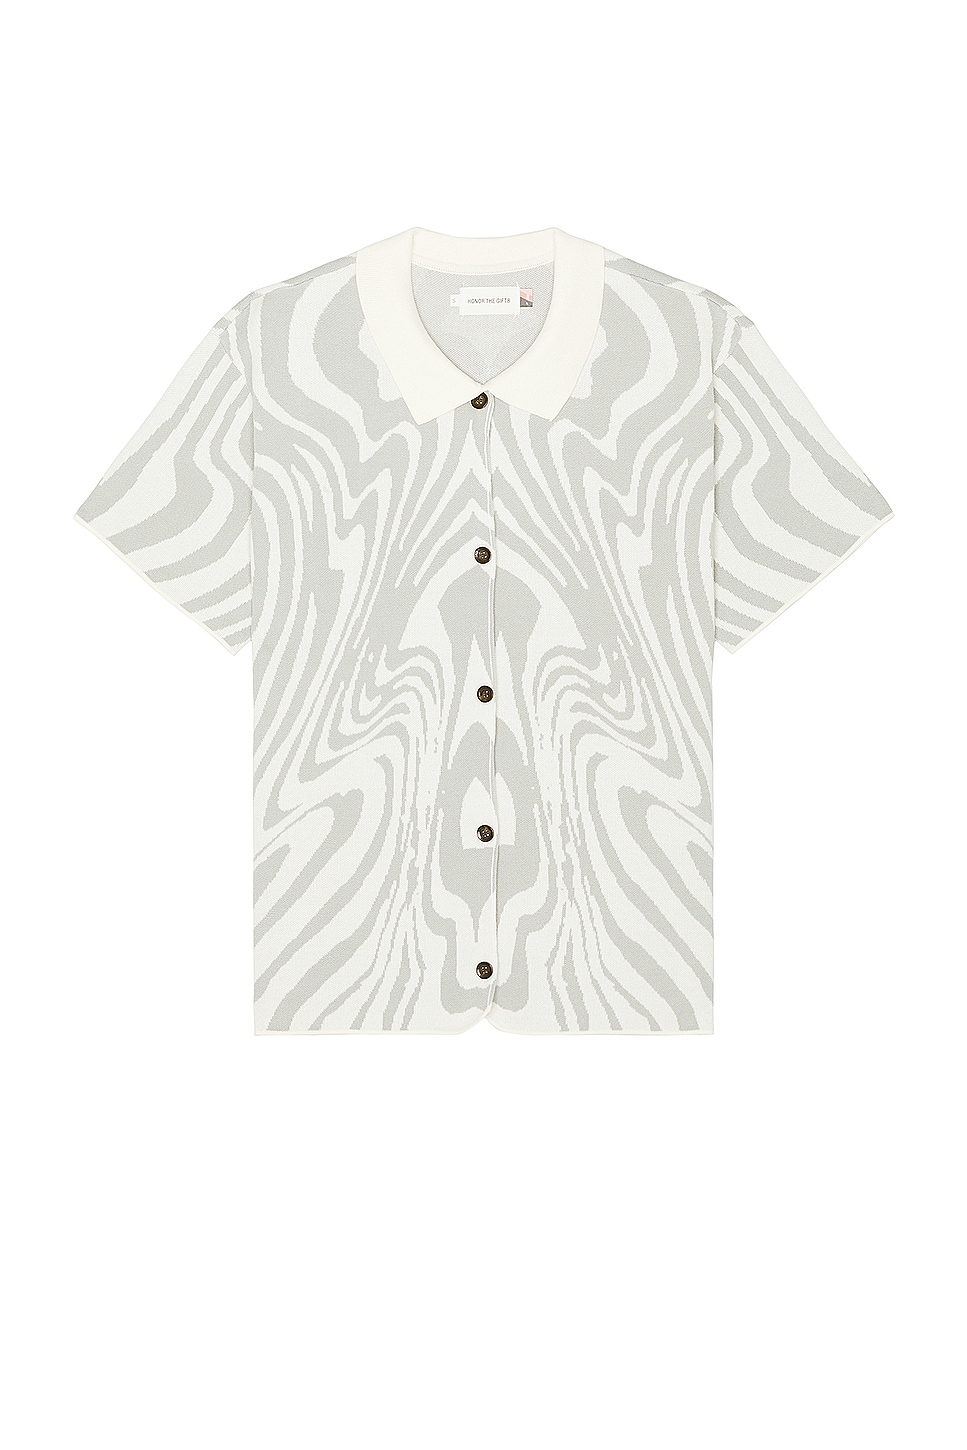 Image 1 of Honor The Gift A-spring Dazed Button Up Shirt in Bone